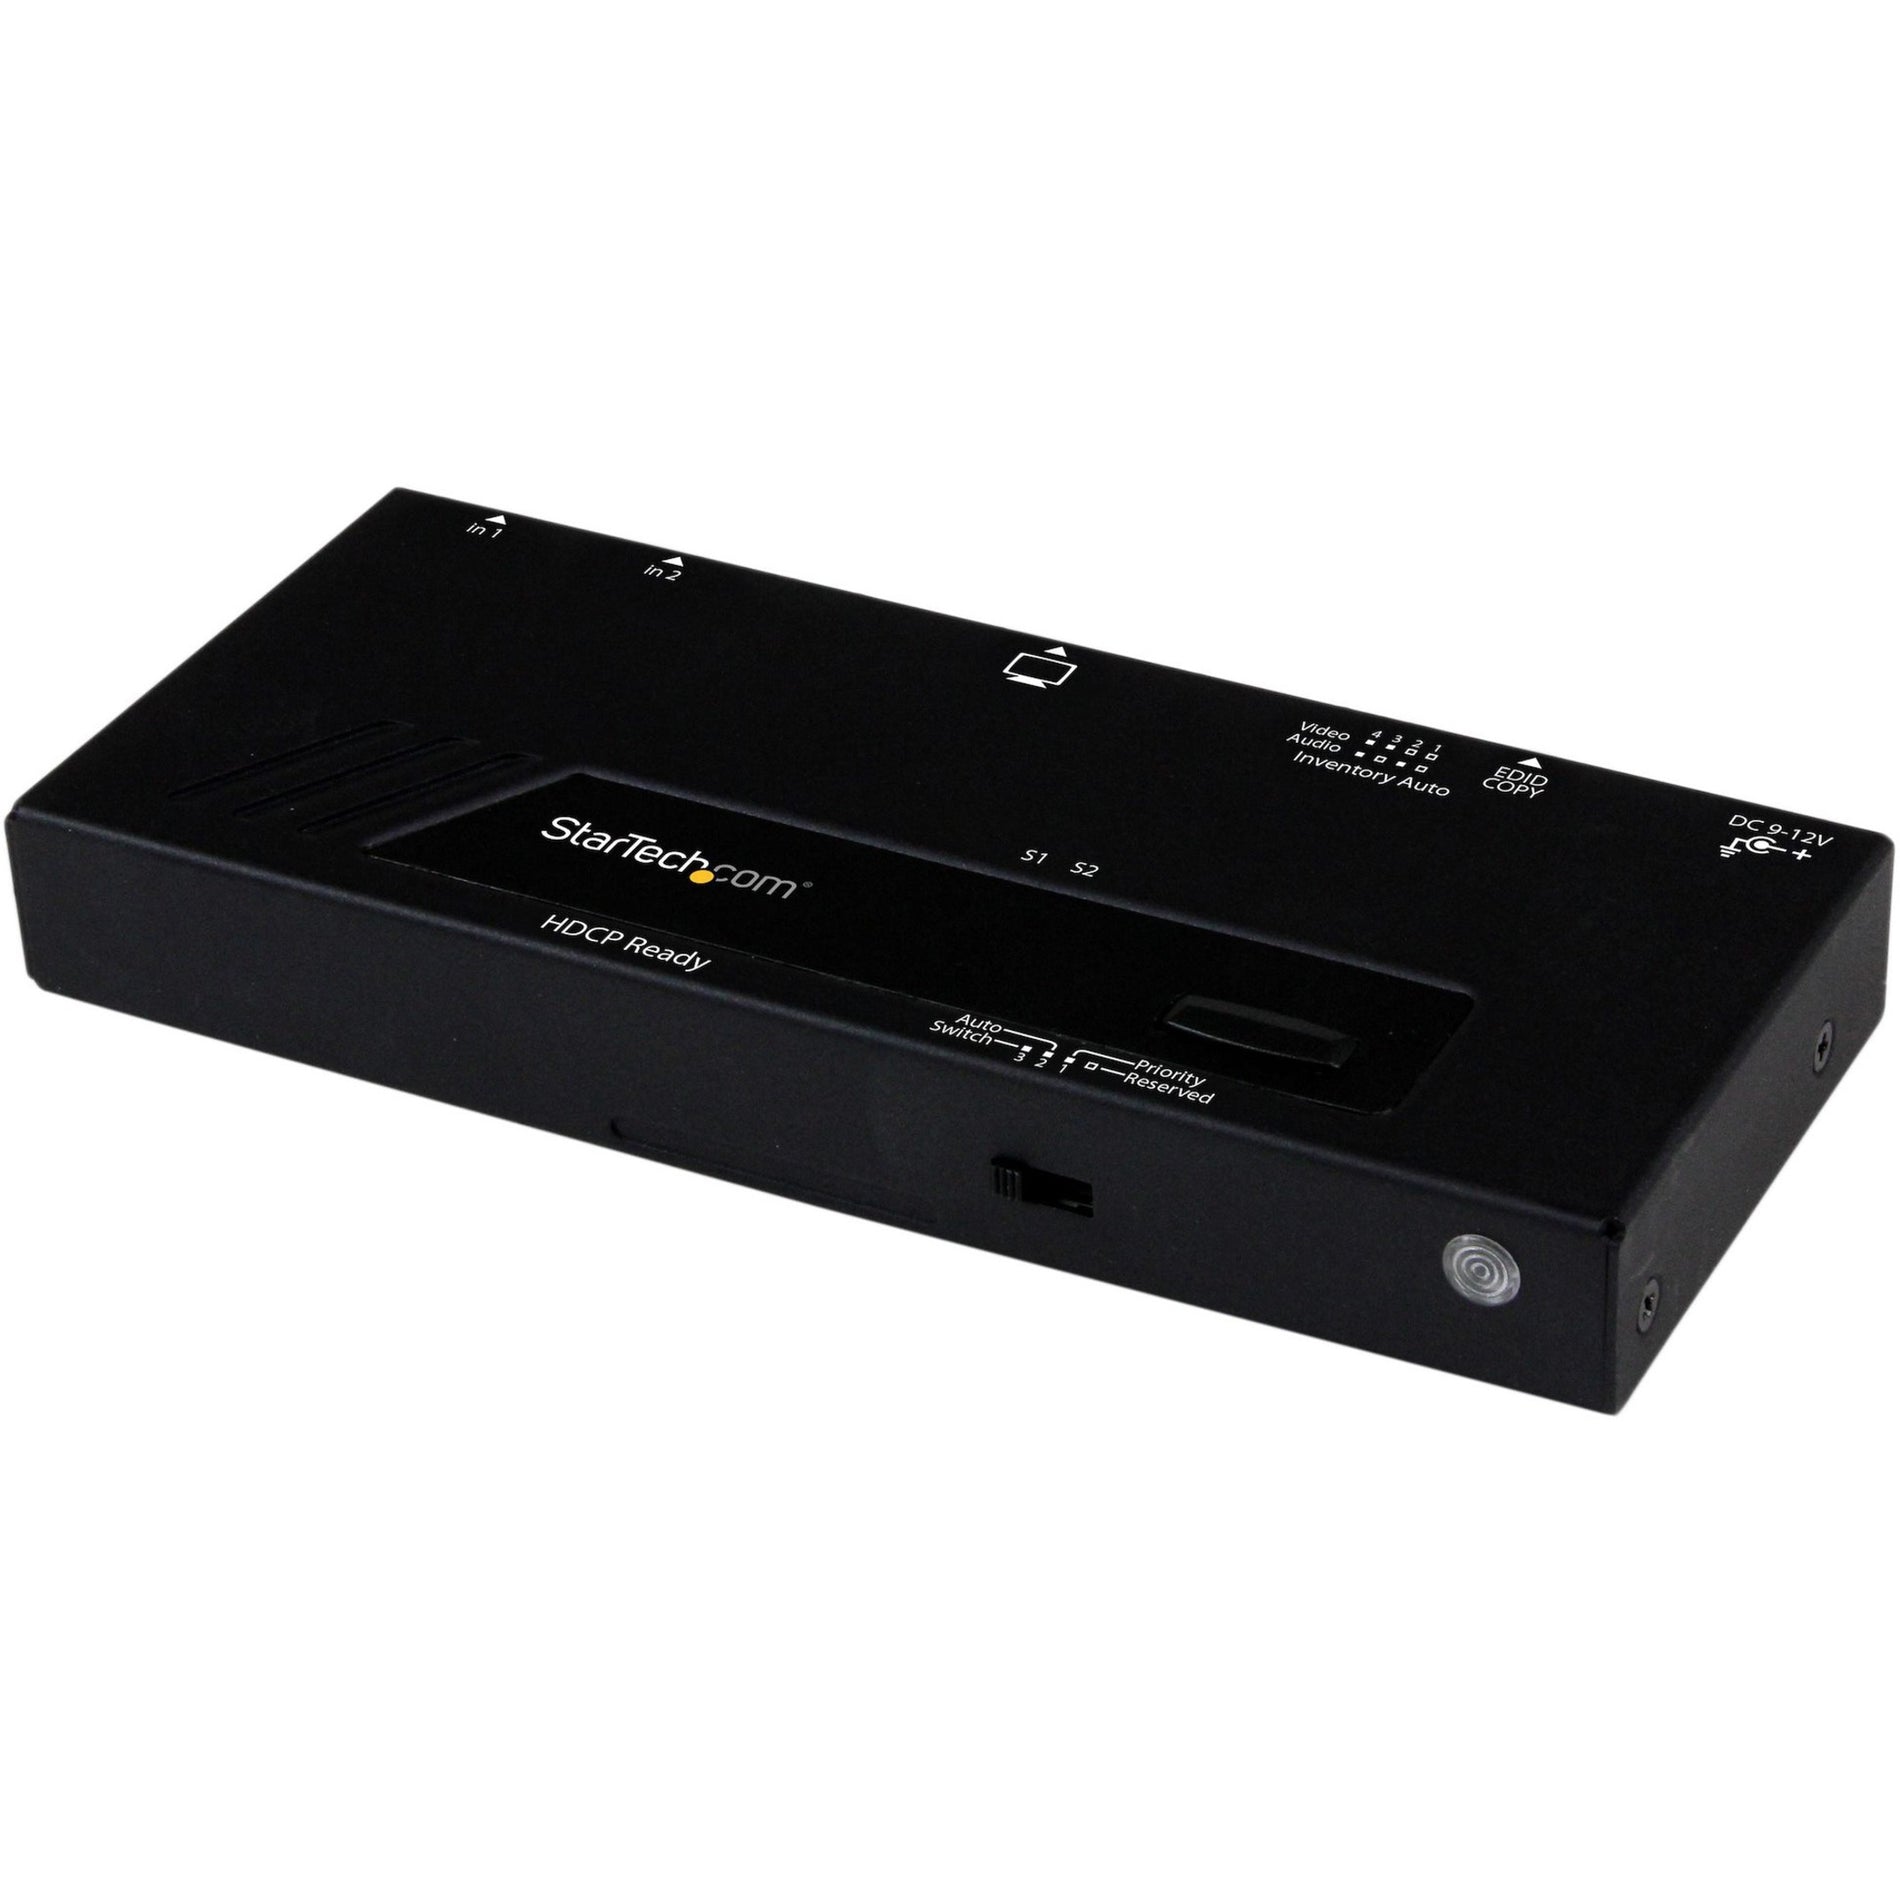 StarTech.com VS221HDQ 2 Port HDMI Switch w/ Automatic and Priority Switching - 1080p, Full HD, 2 Year Warranty